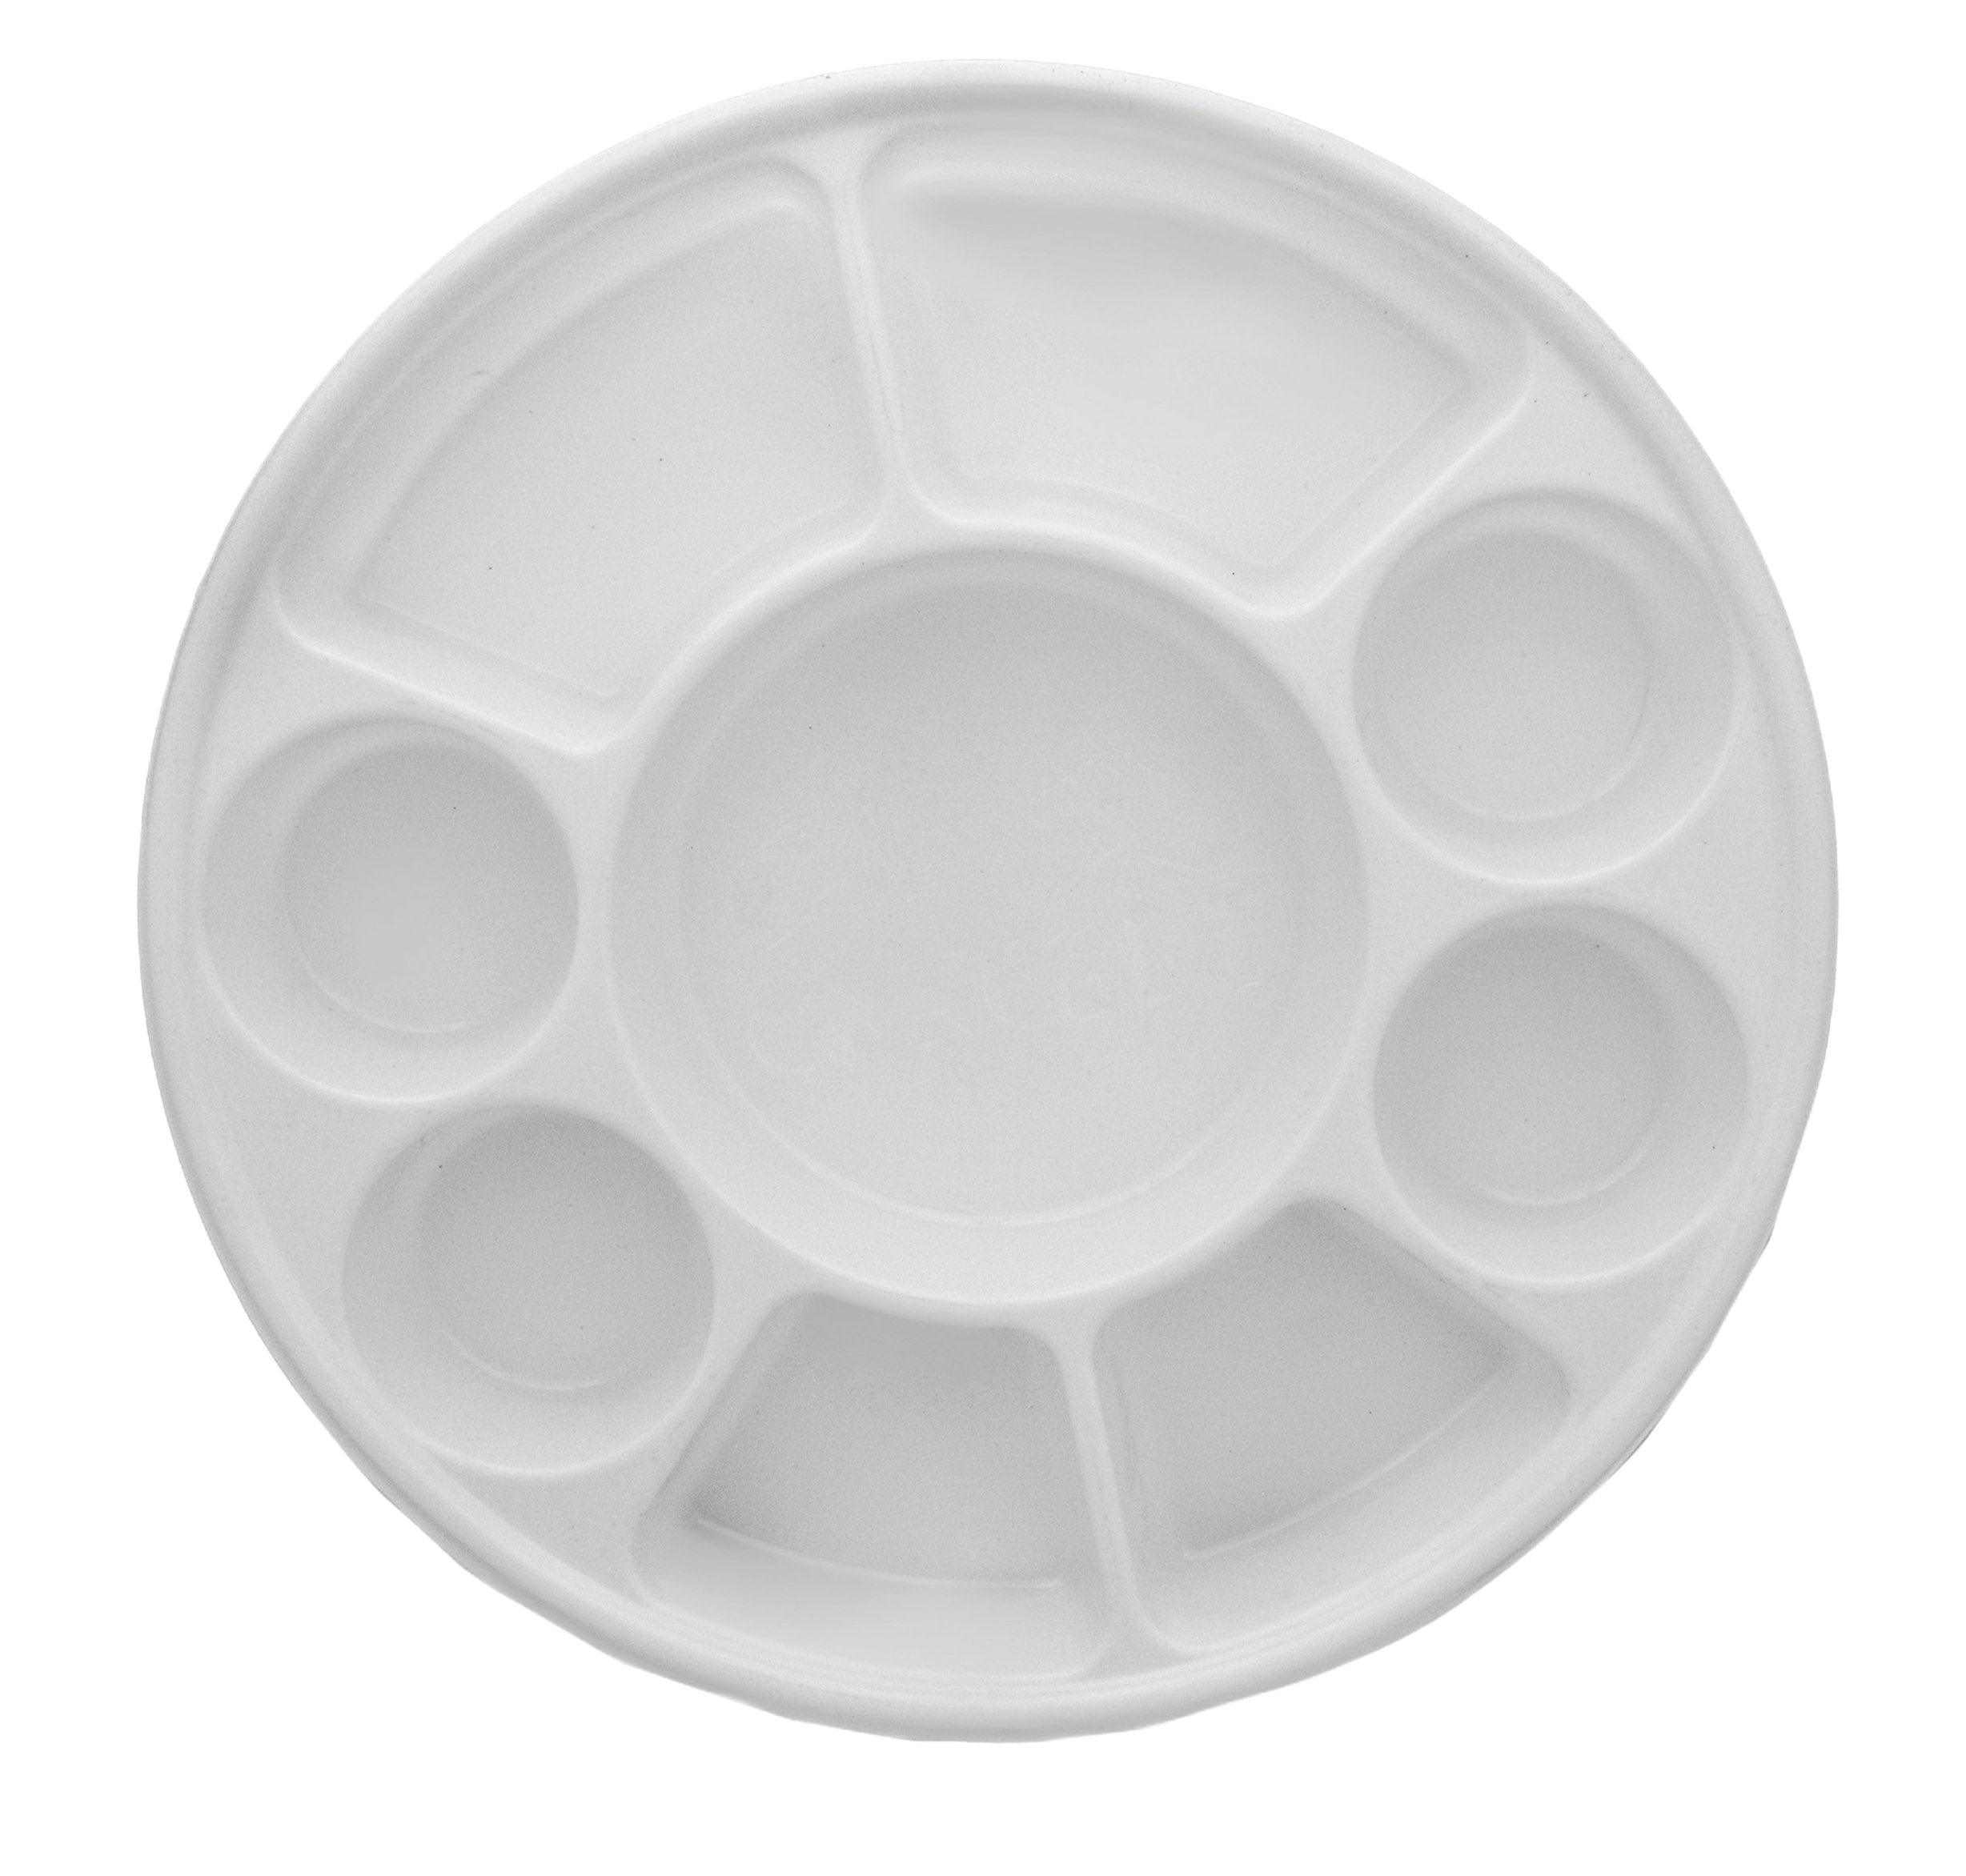  JAYEEY 23 OZ 4 Compartments disposable plates with